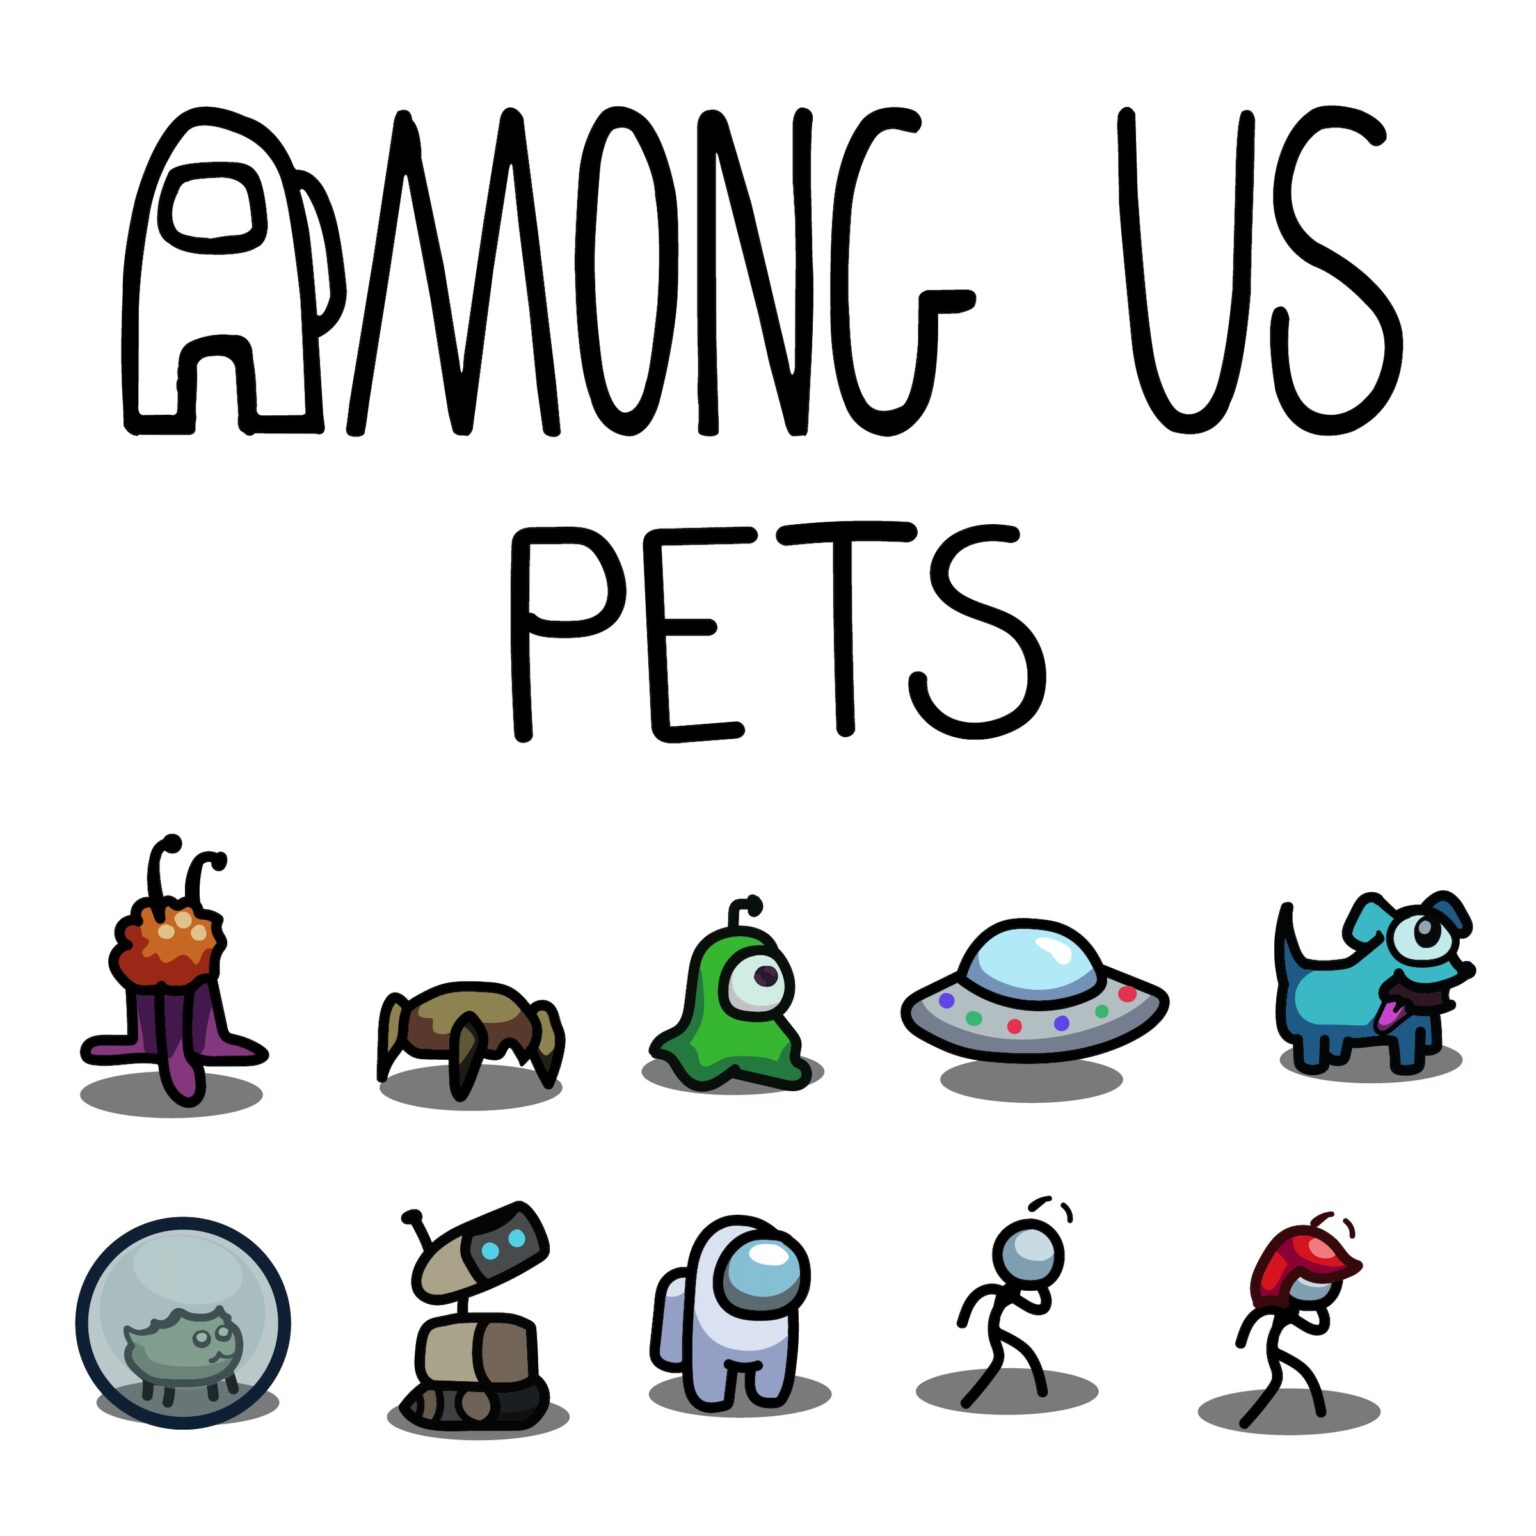 Don't miss out on getting the free 'Among Us' pet from Twitch! Now you can have the Twitch Glitch follow you around.